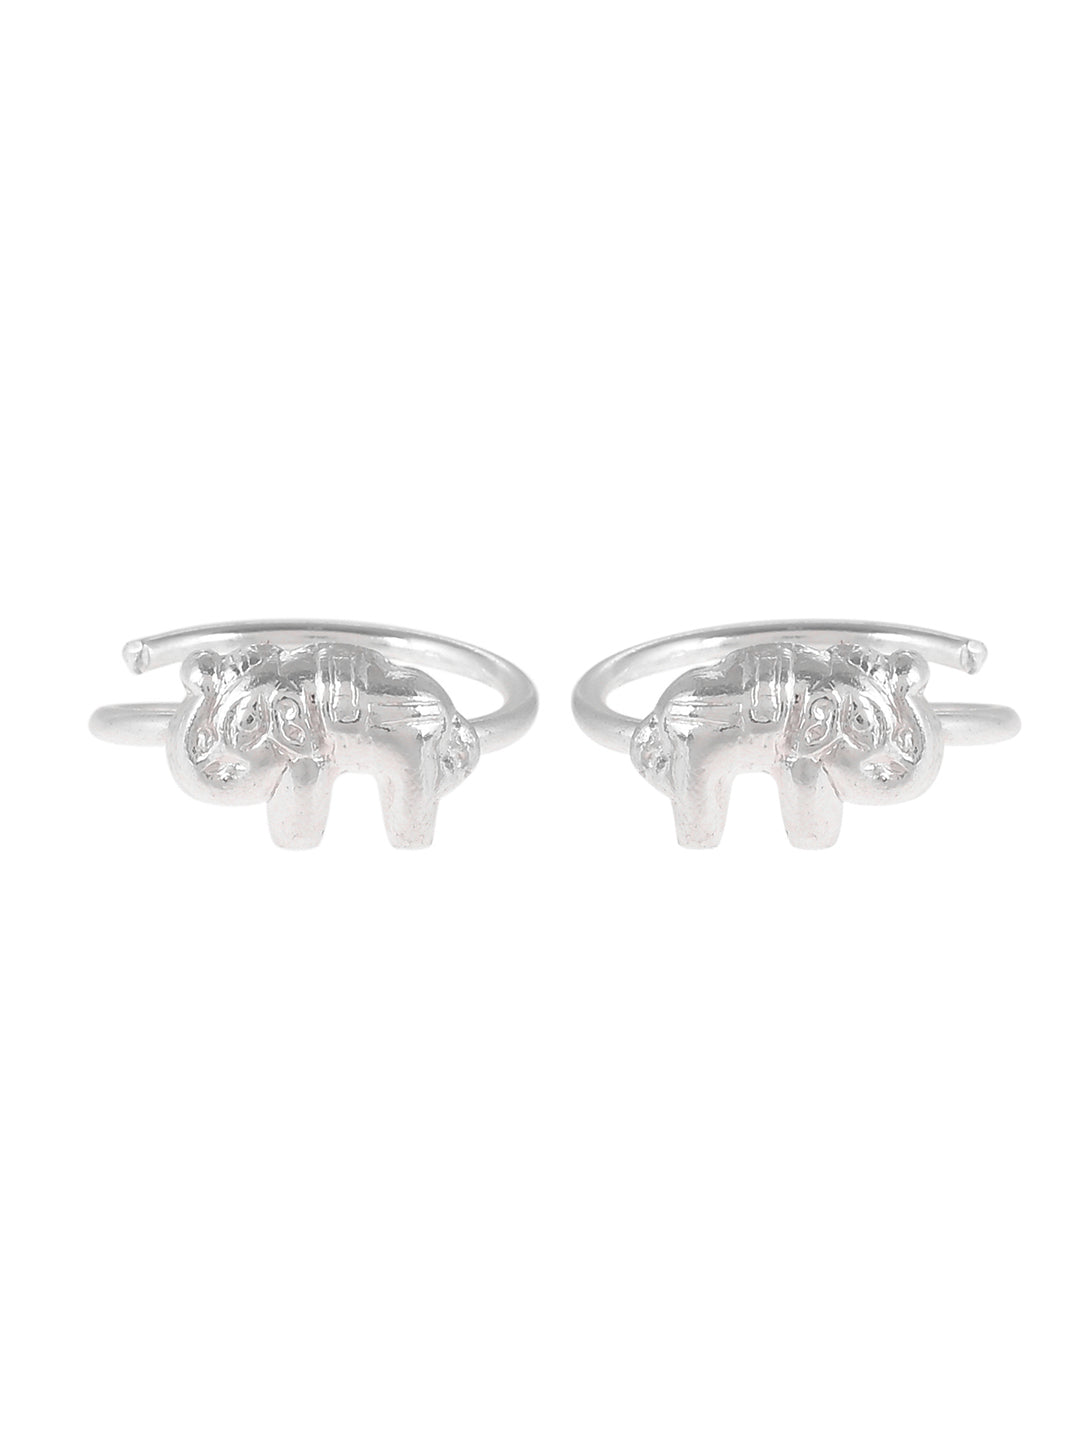 Silver Plated Elephant Handcrafted Toe Ring for women